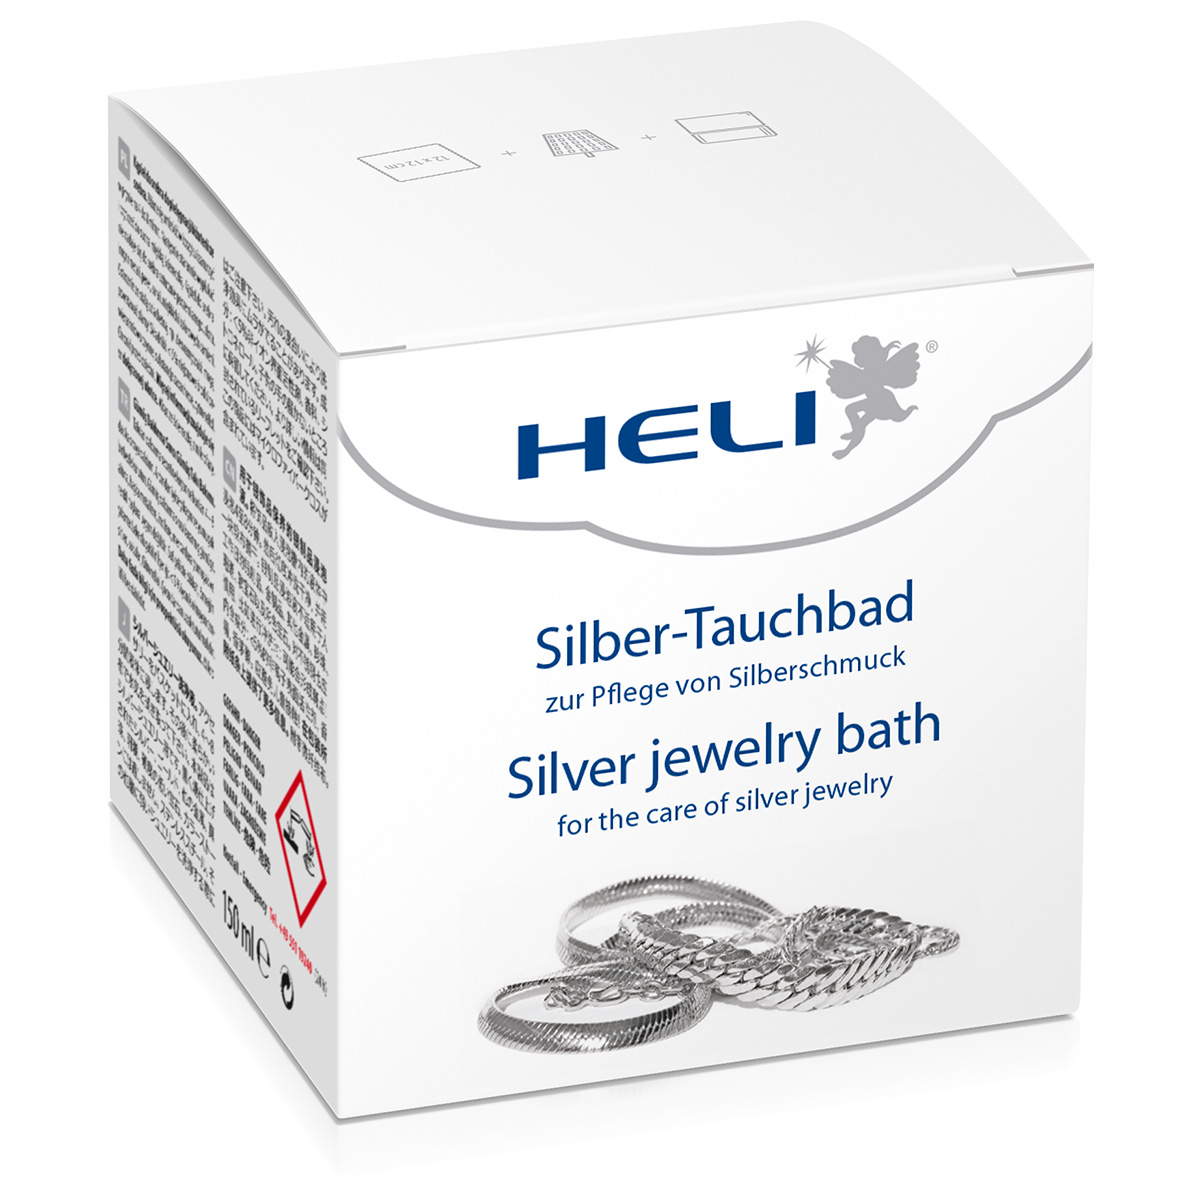 Heli silver  jewelry bath with rinsing basket and cleaning cloth, jeweler's packaging, 150 ml